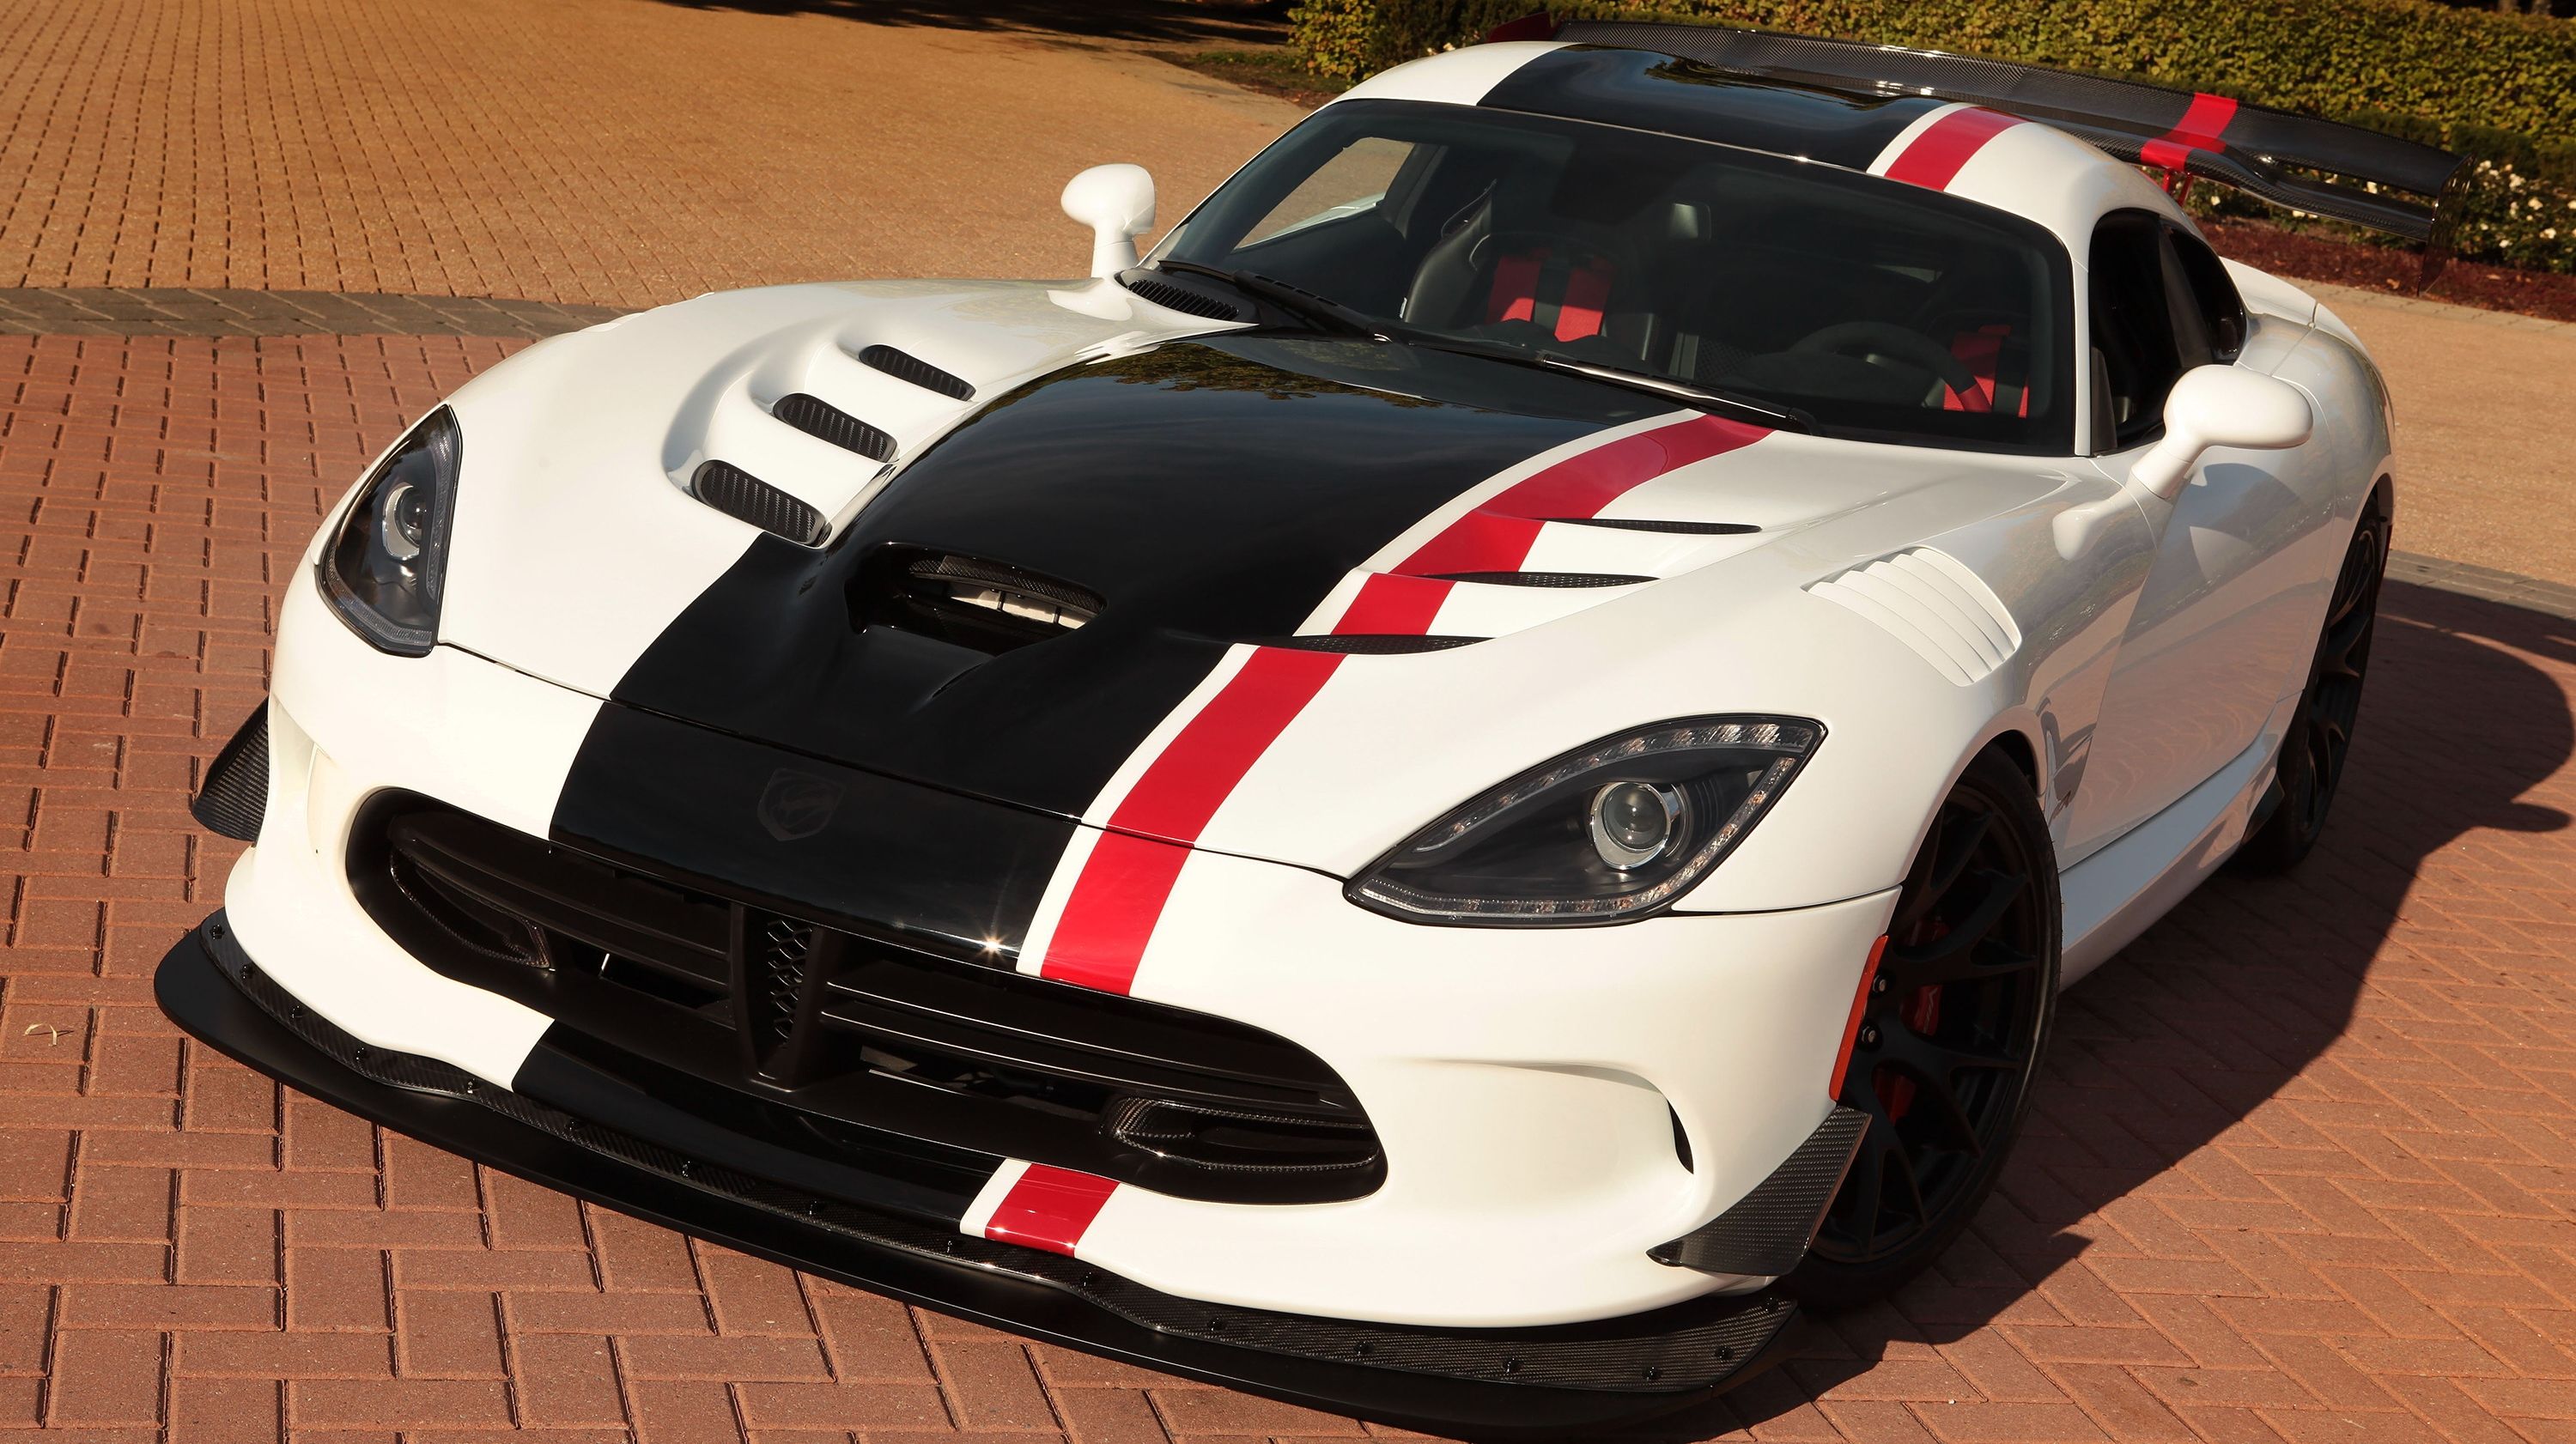  Does this Viper ACR Concept mean that the legendary Viper racer could make a comeback?